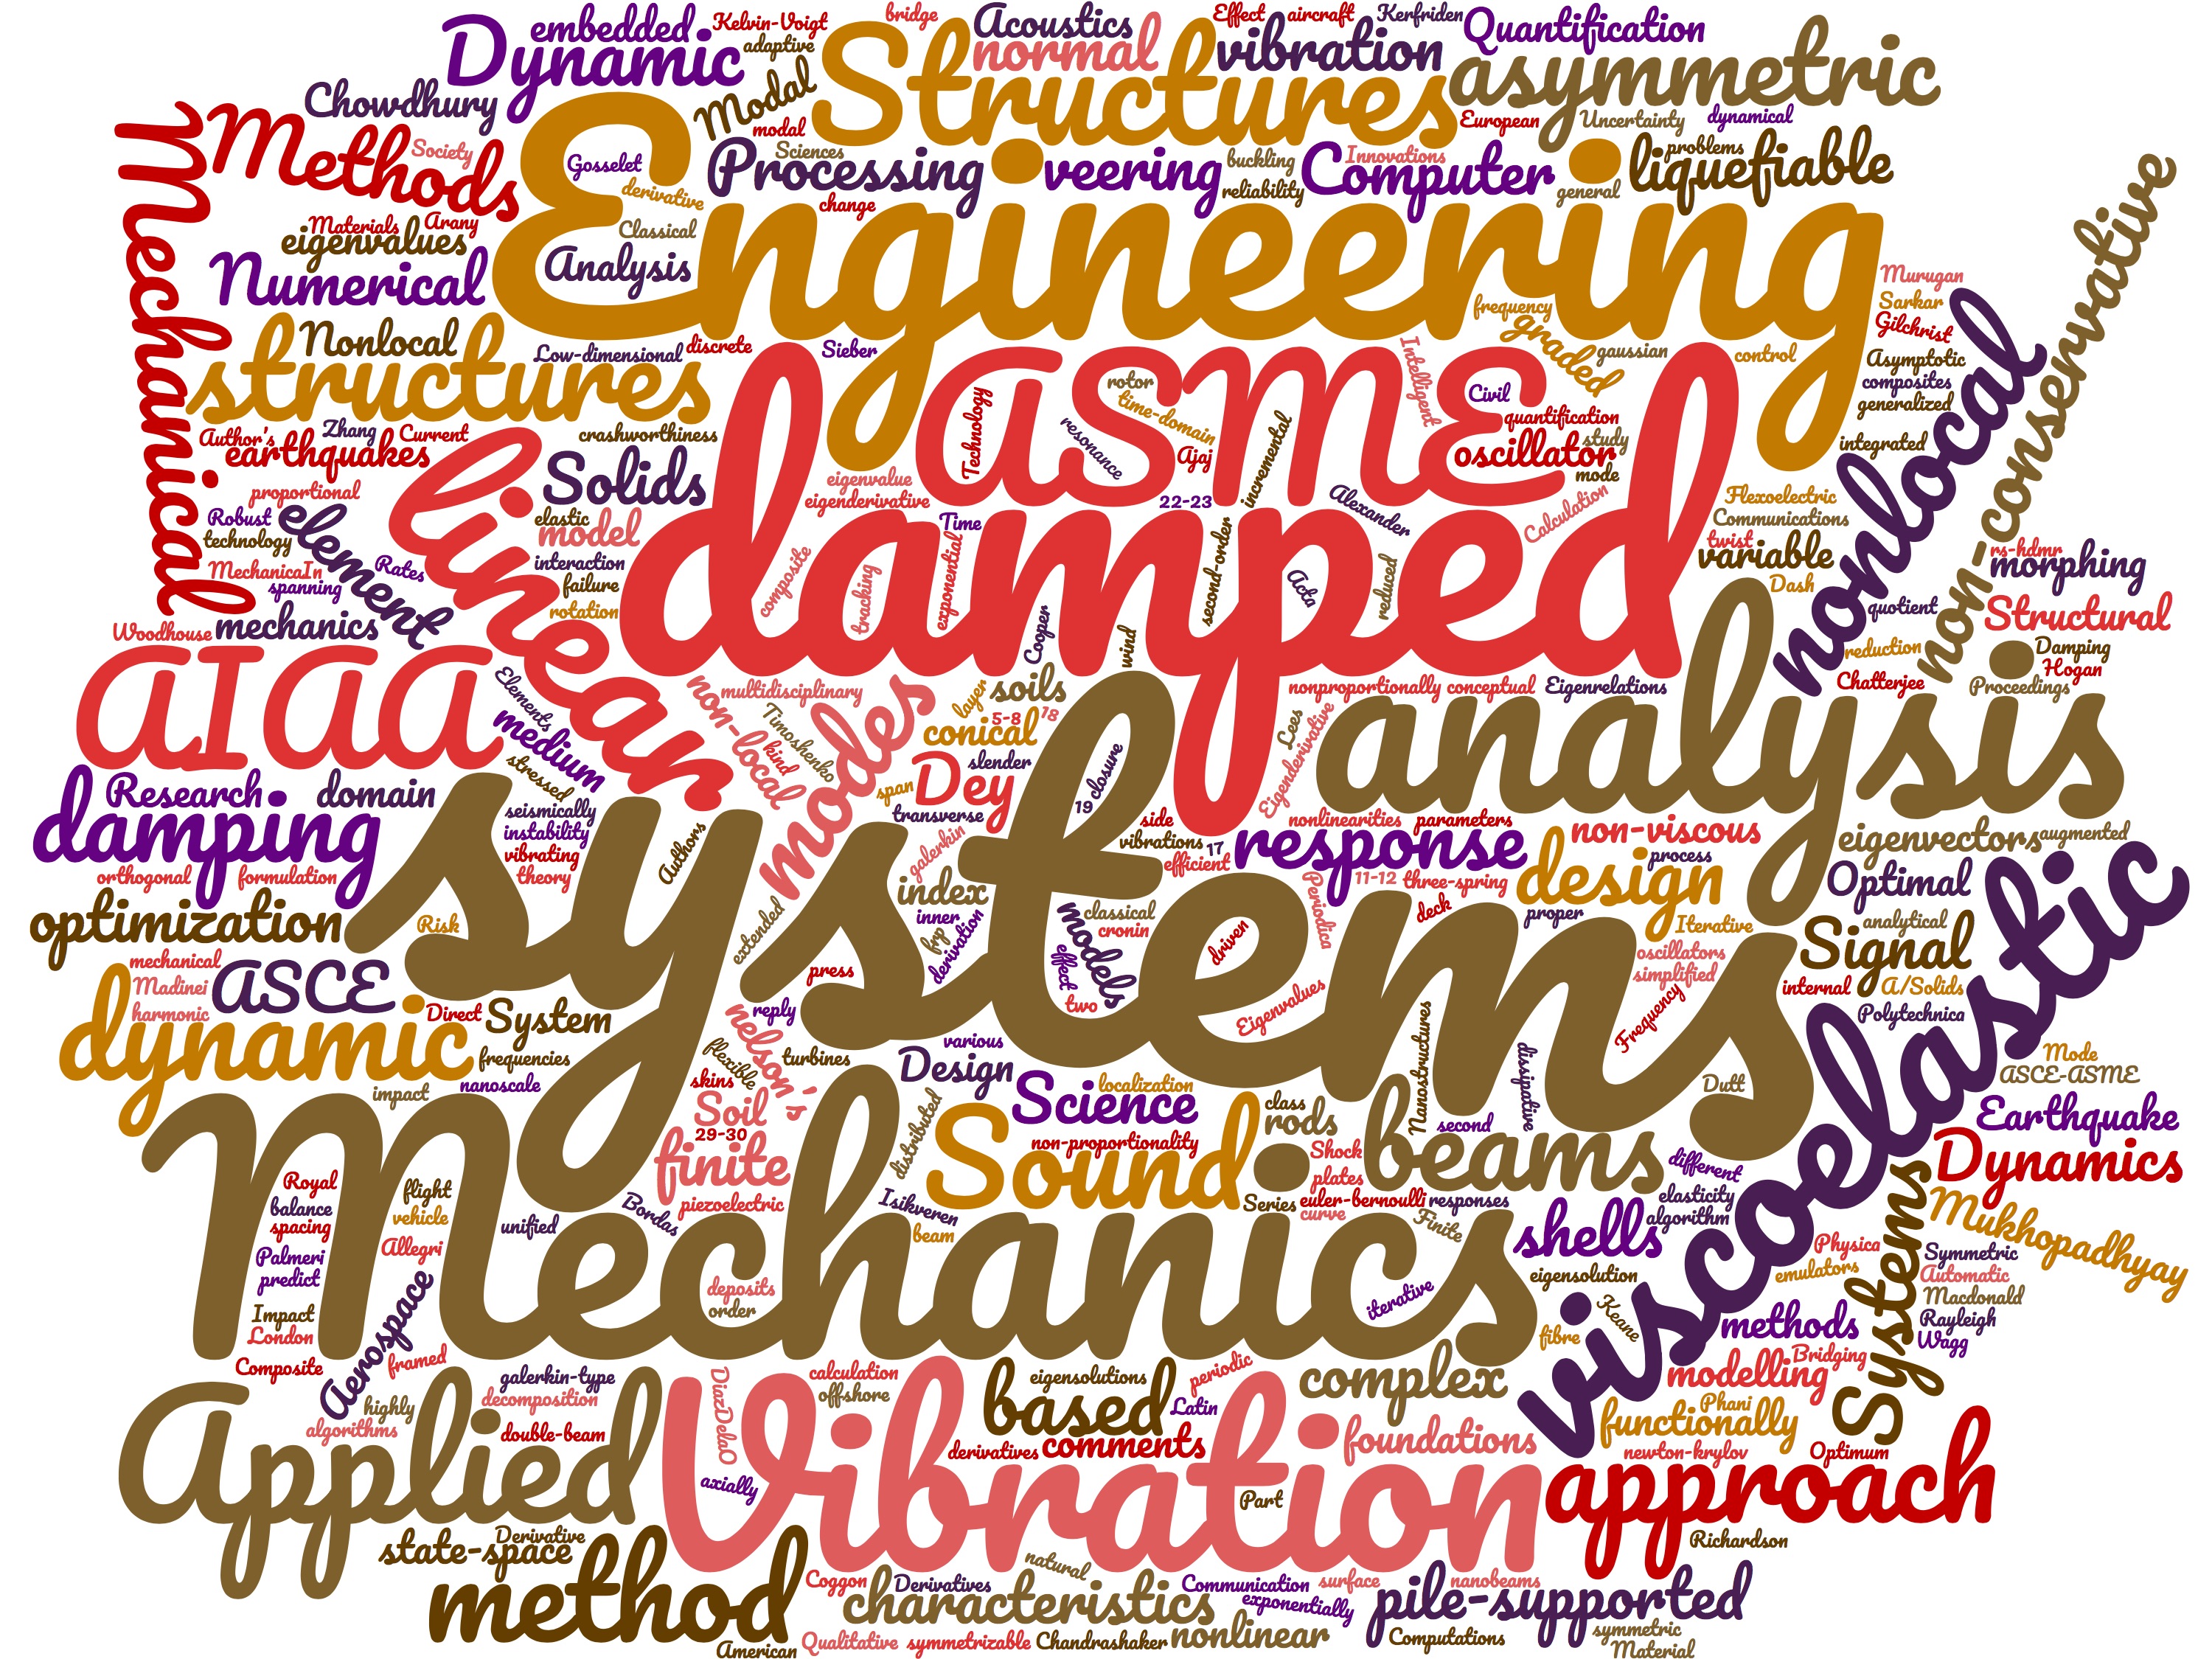 A word-cloud from the title of the journal papers